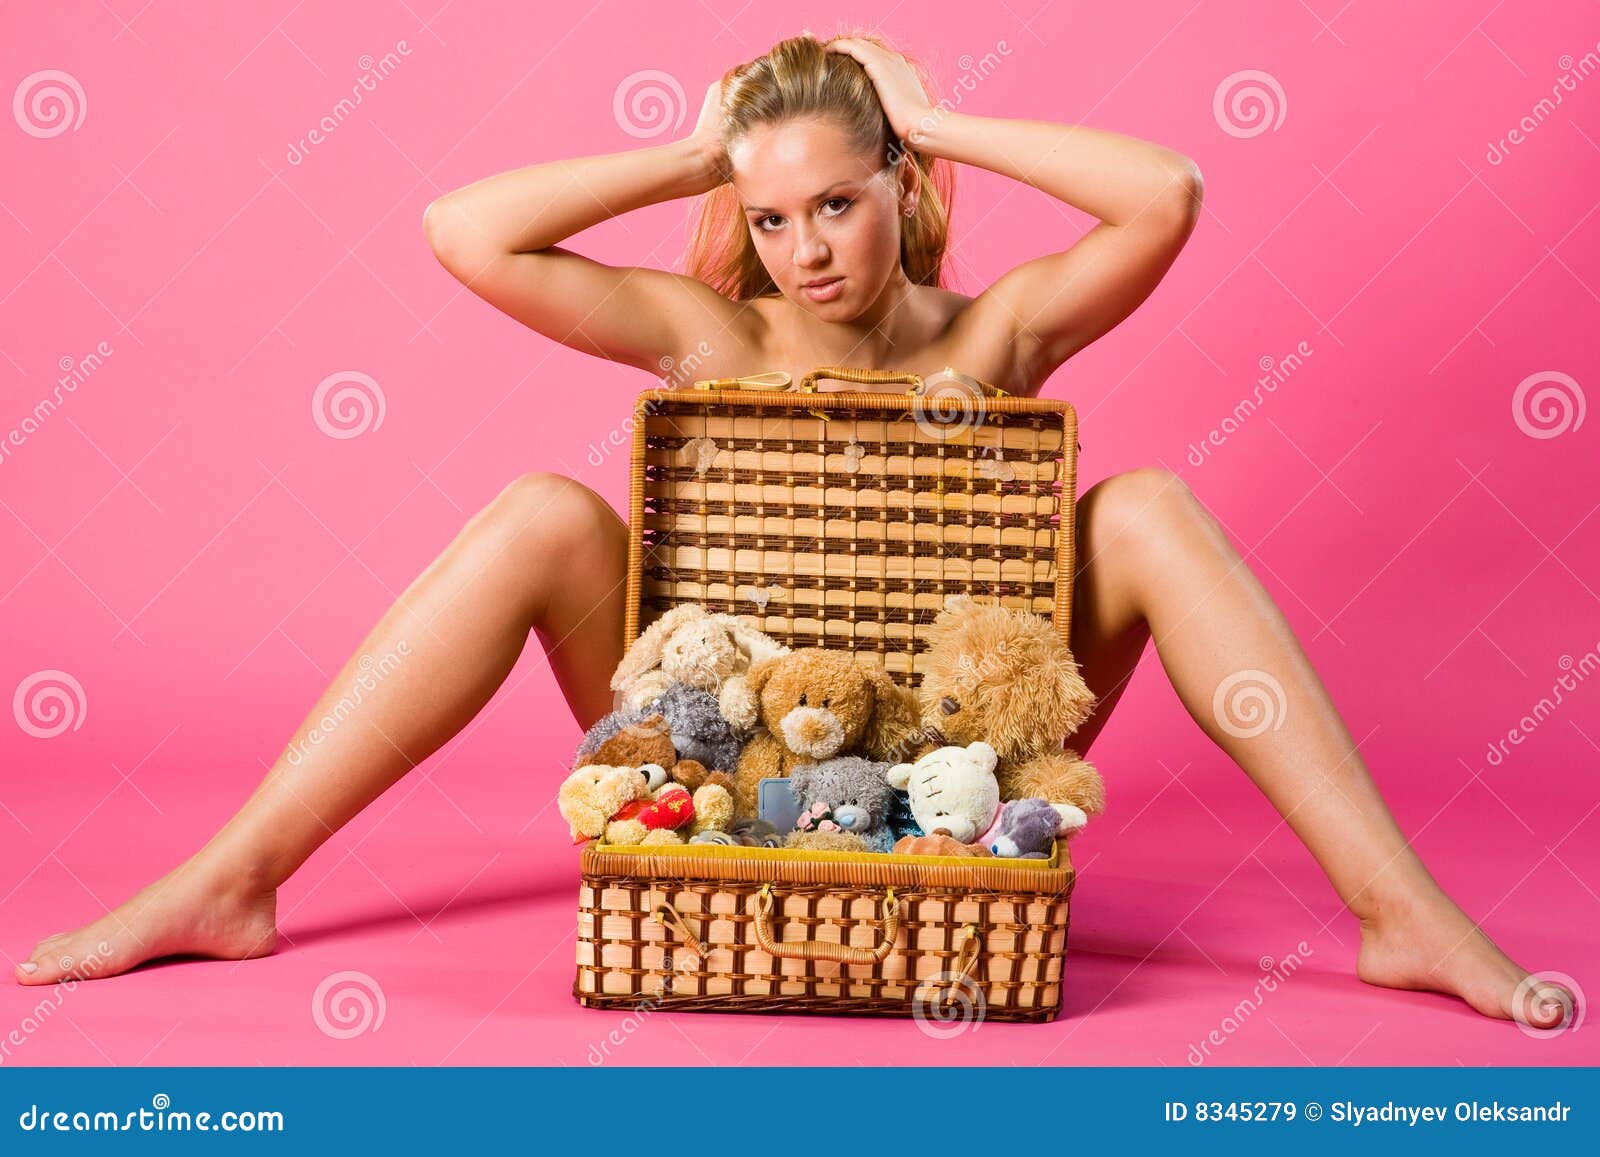 sweetness blond with box of teddies